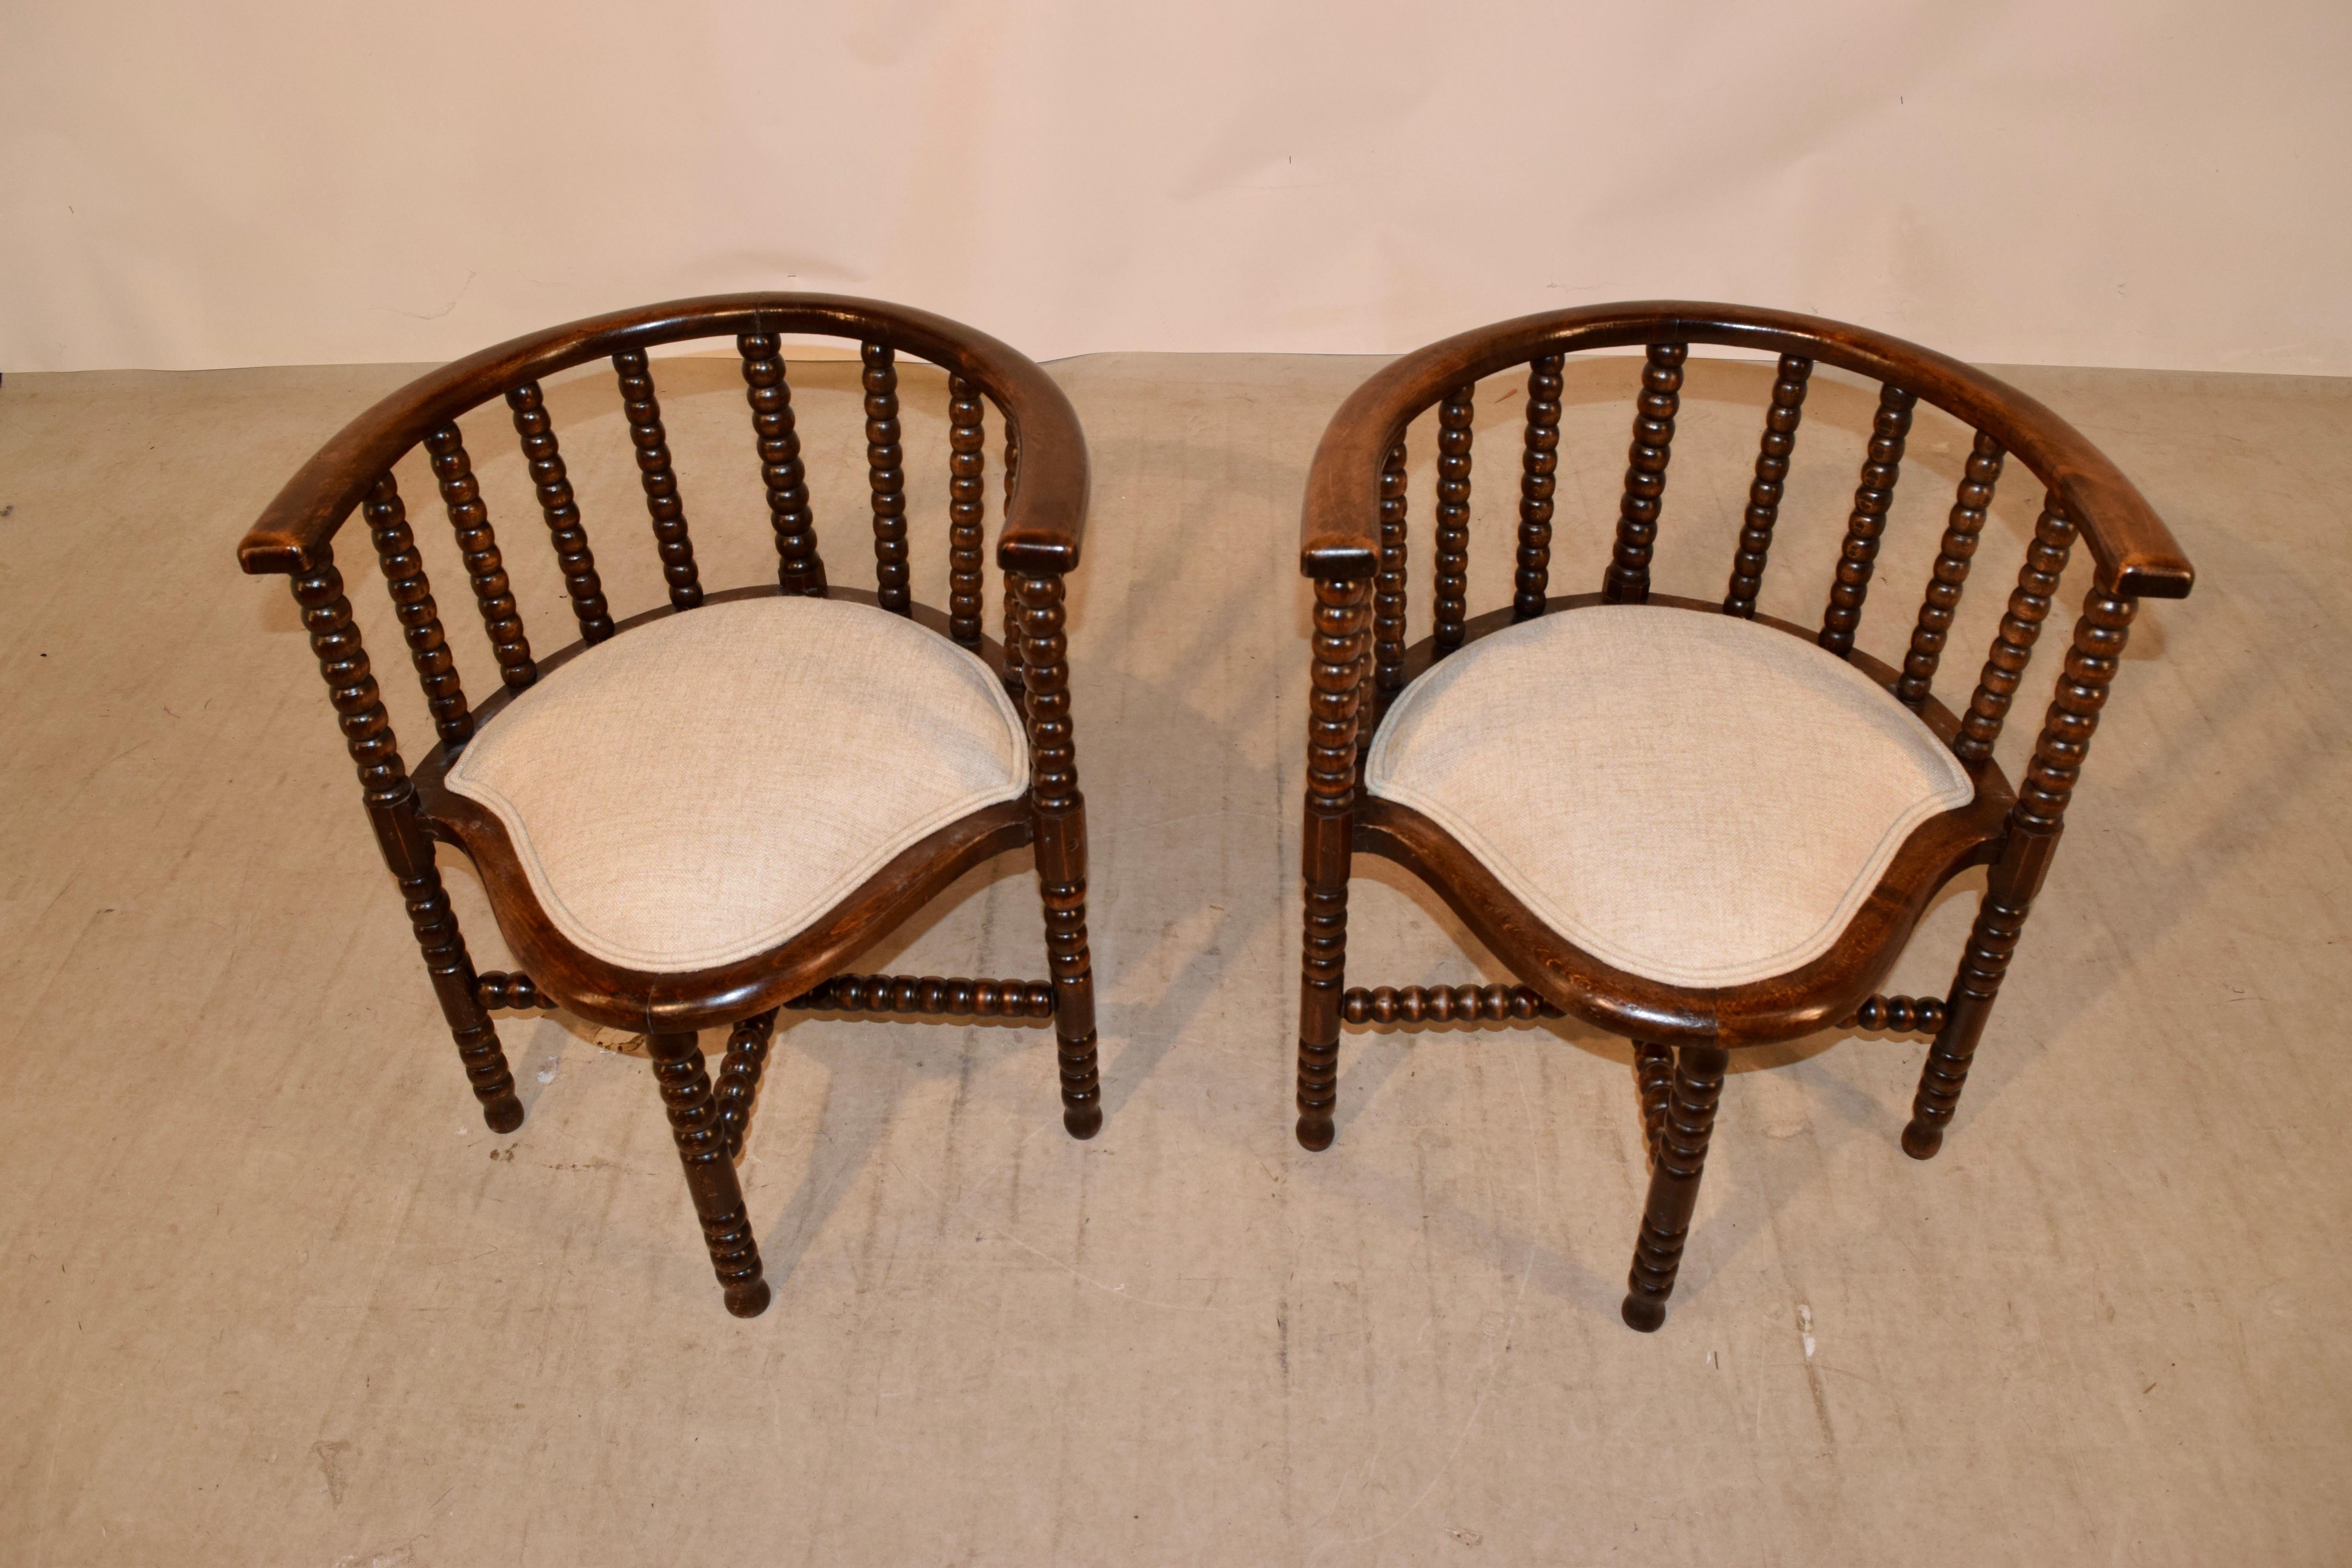 Turned Pair of 19th Century French Bobbin Chairs